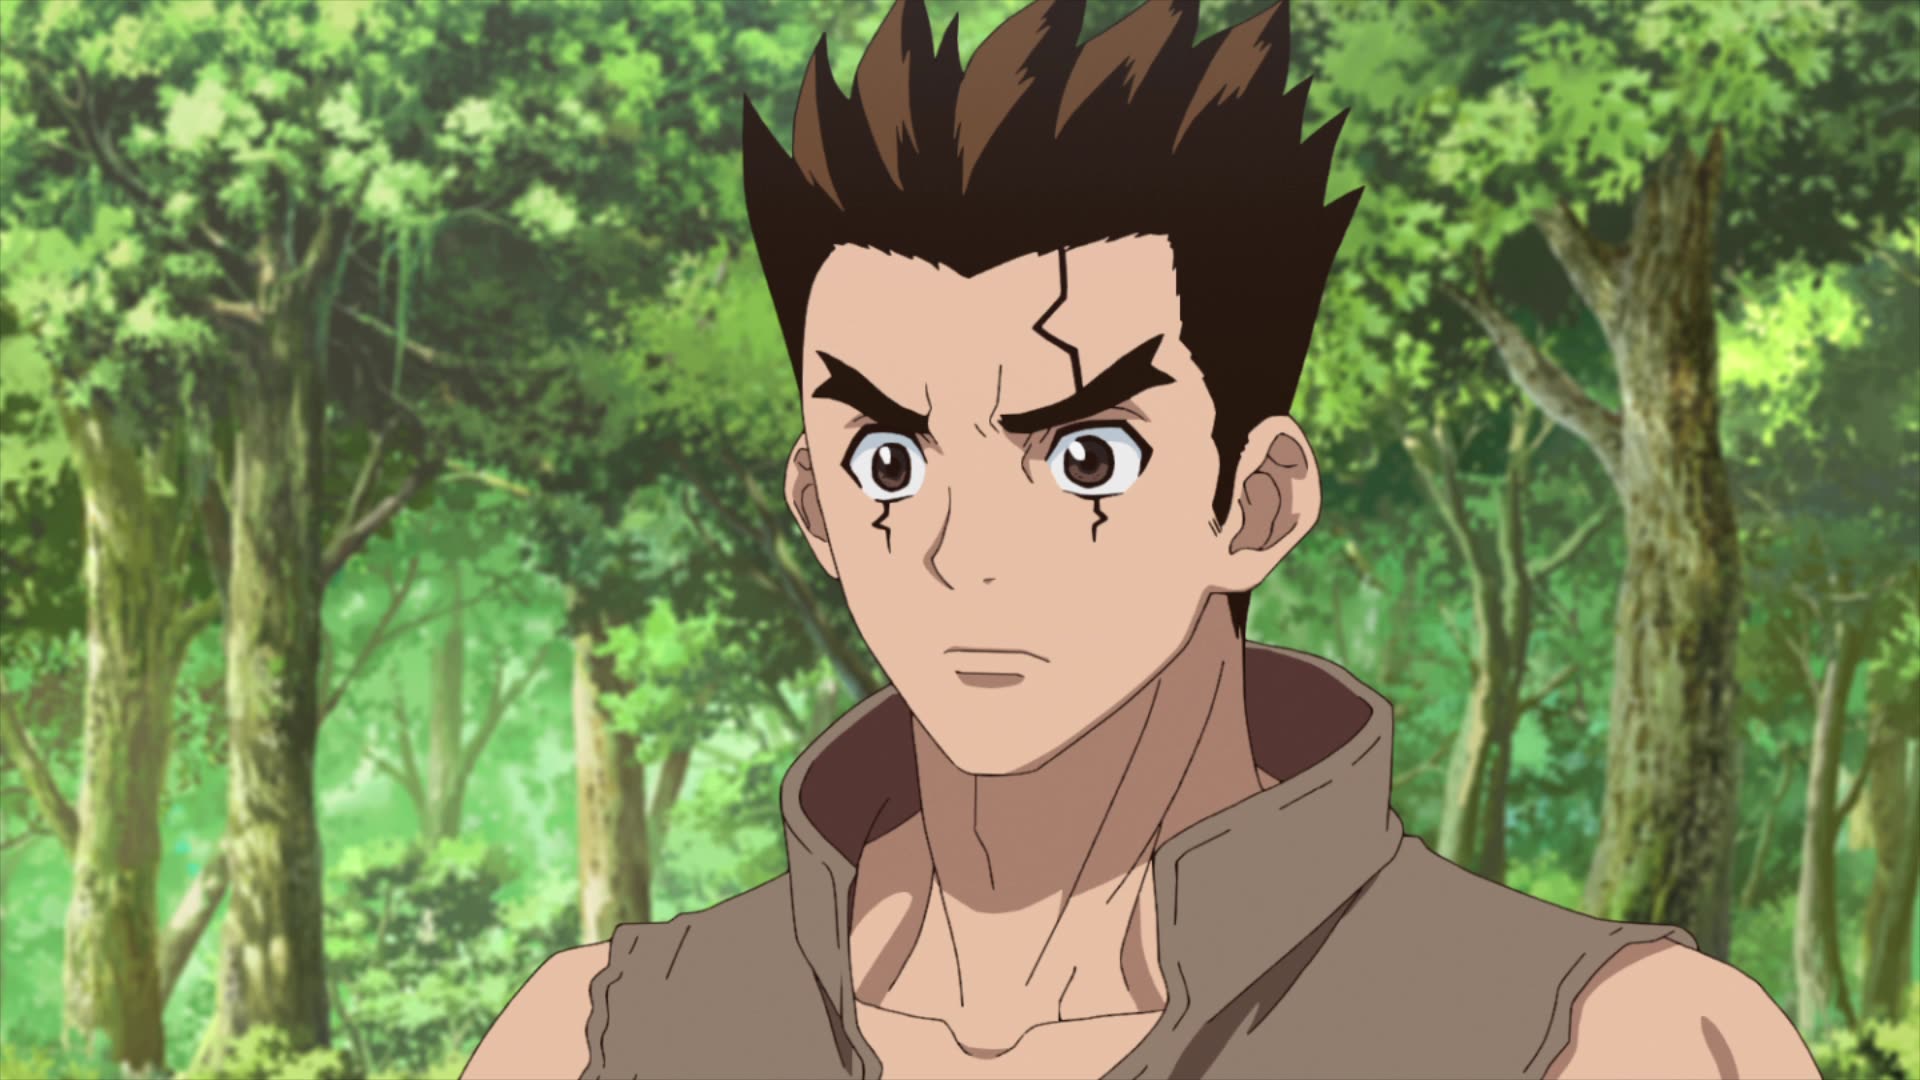 Dr. STONE (German Dub) Episode 3, Weapons of Science, - Watch on Crunchyroll